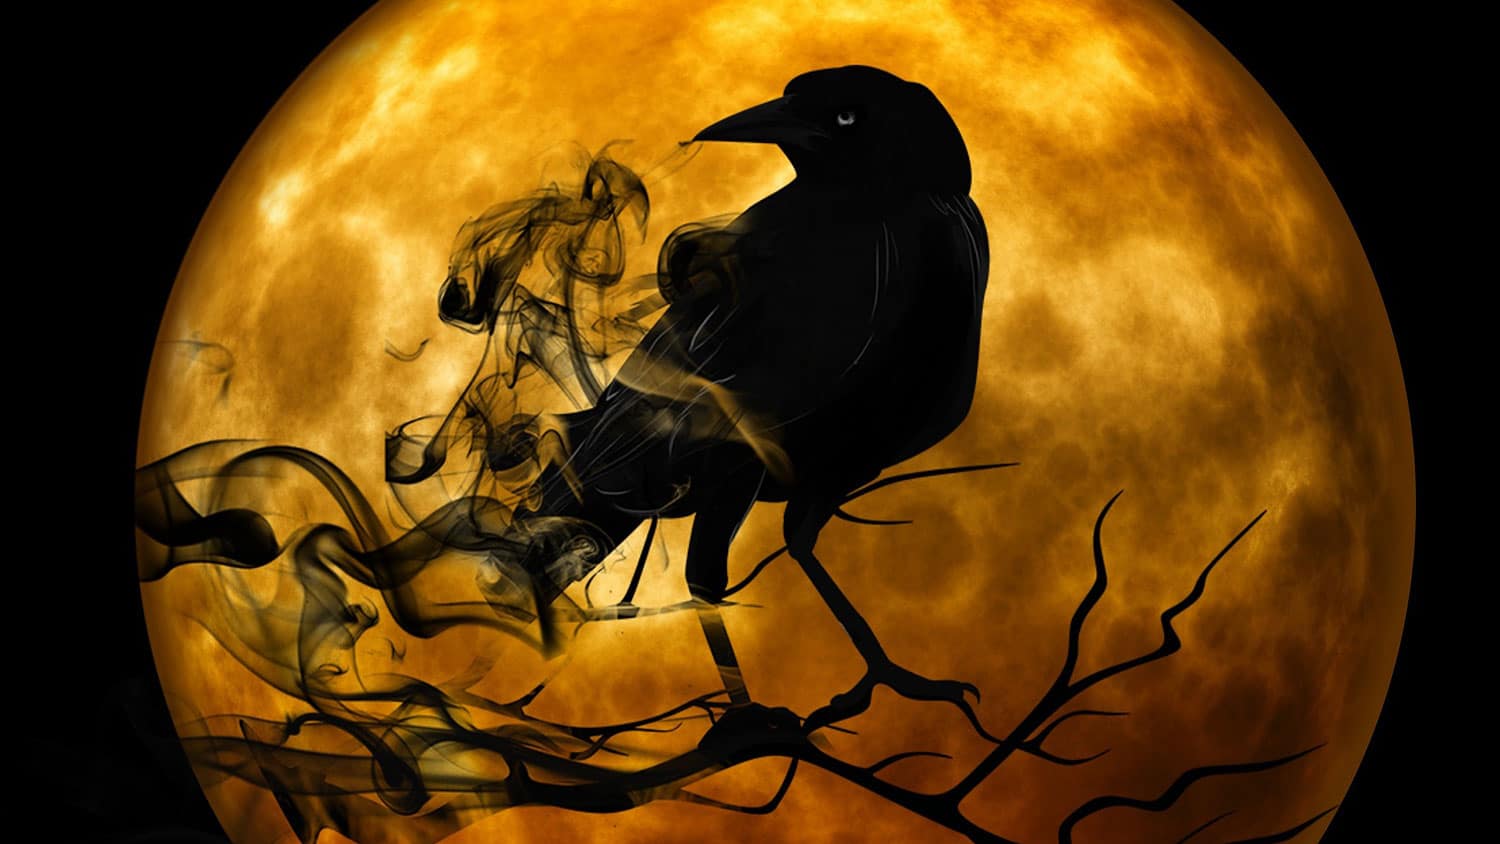 A black raven is sitting on the branch on a full moon's night